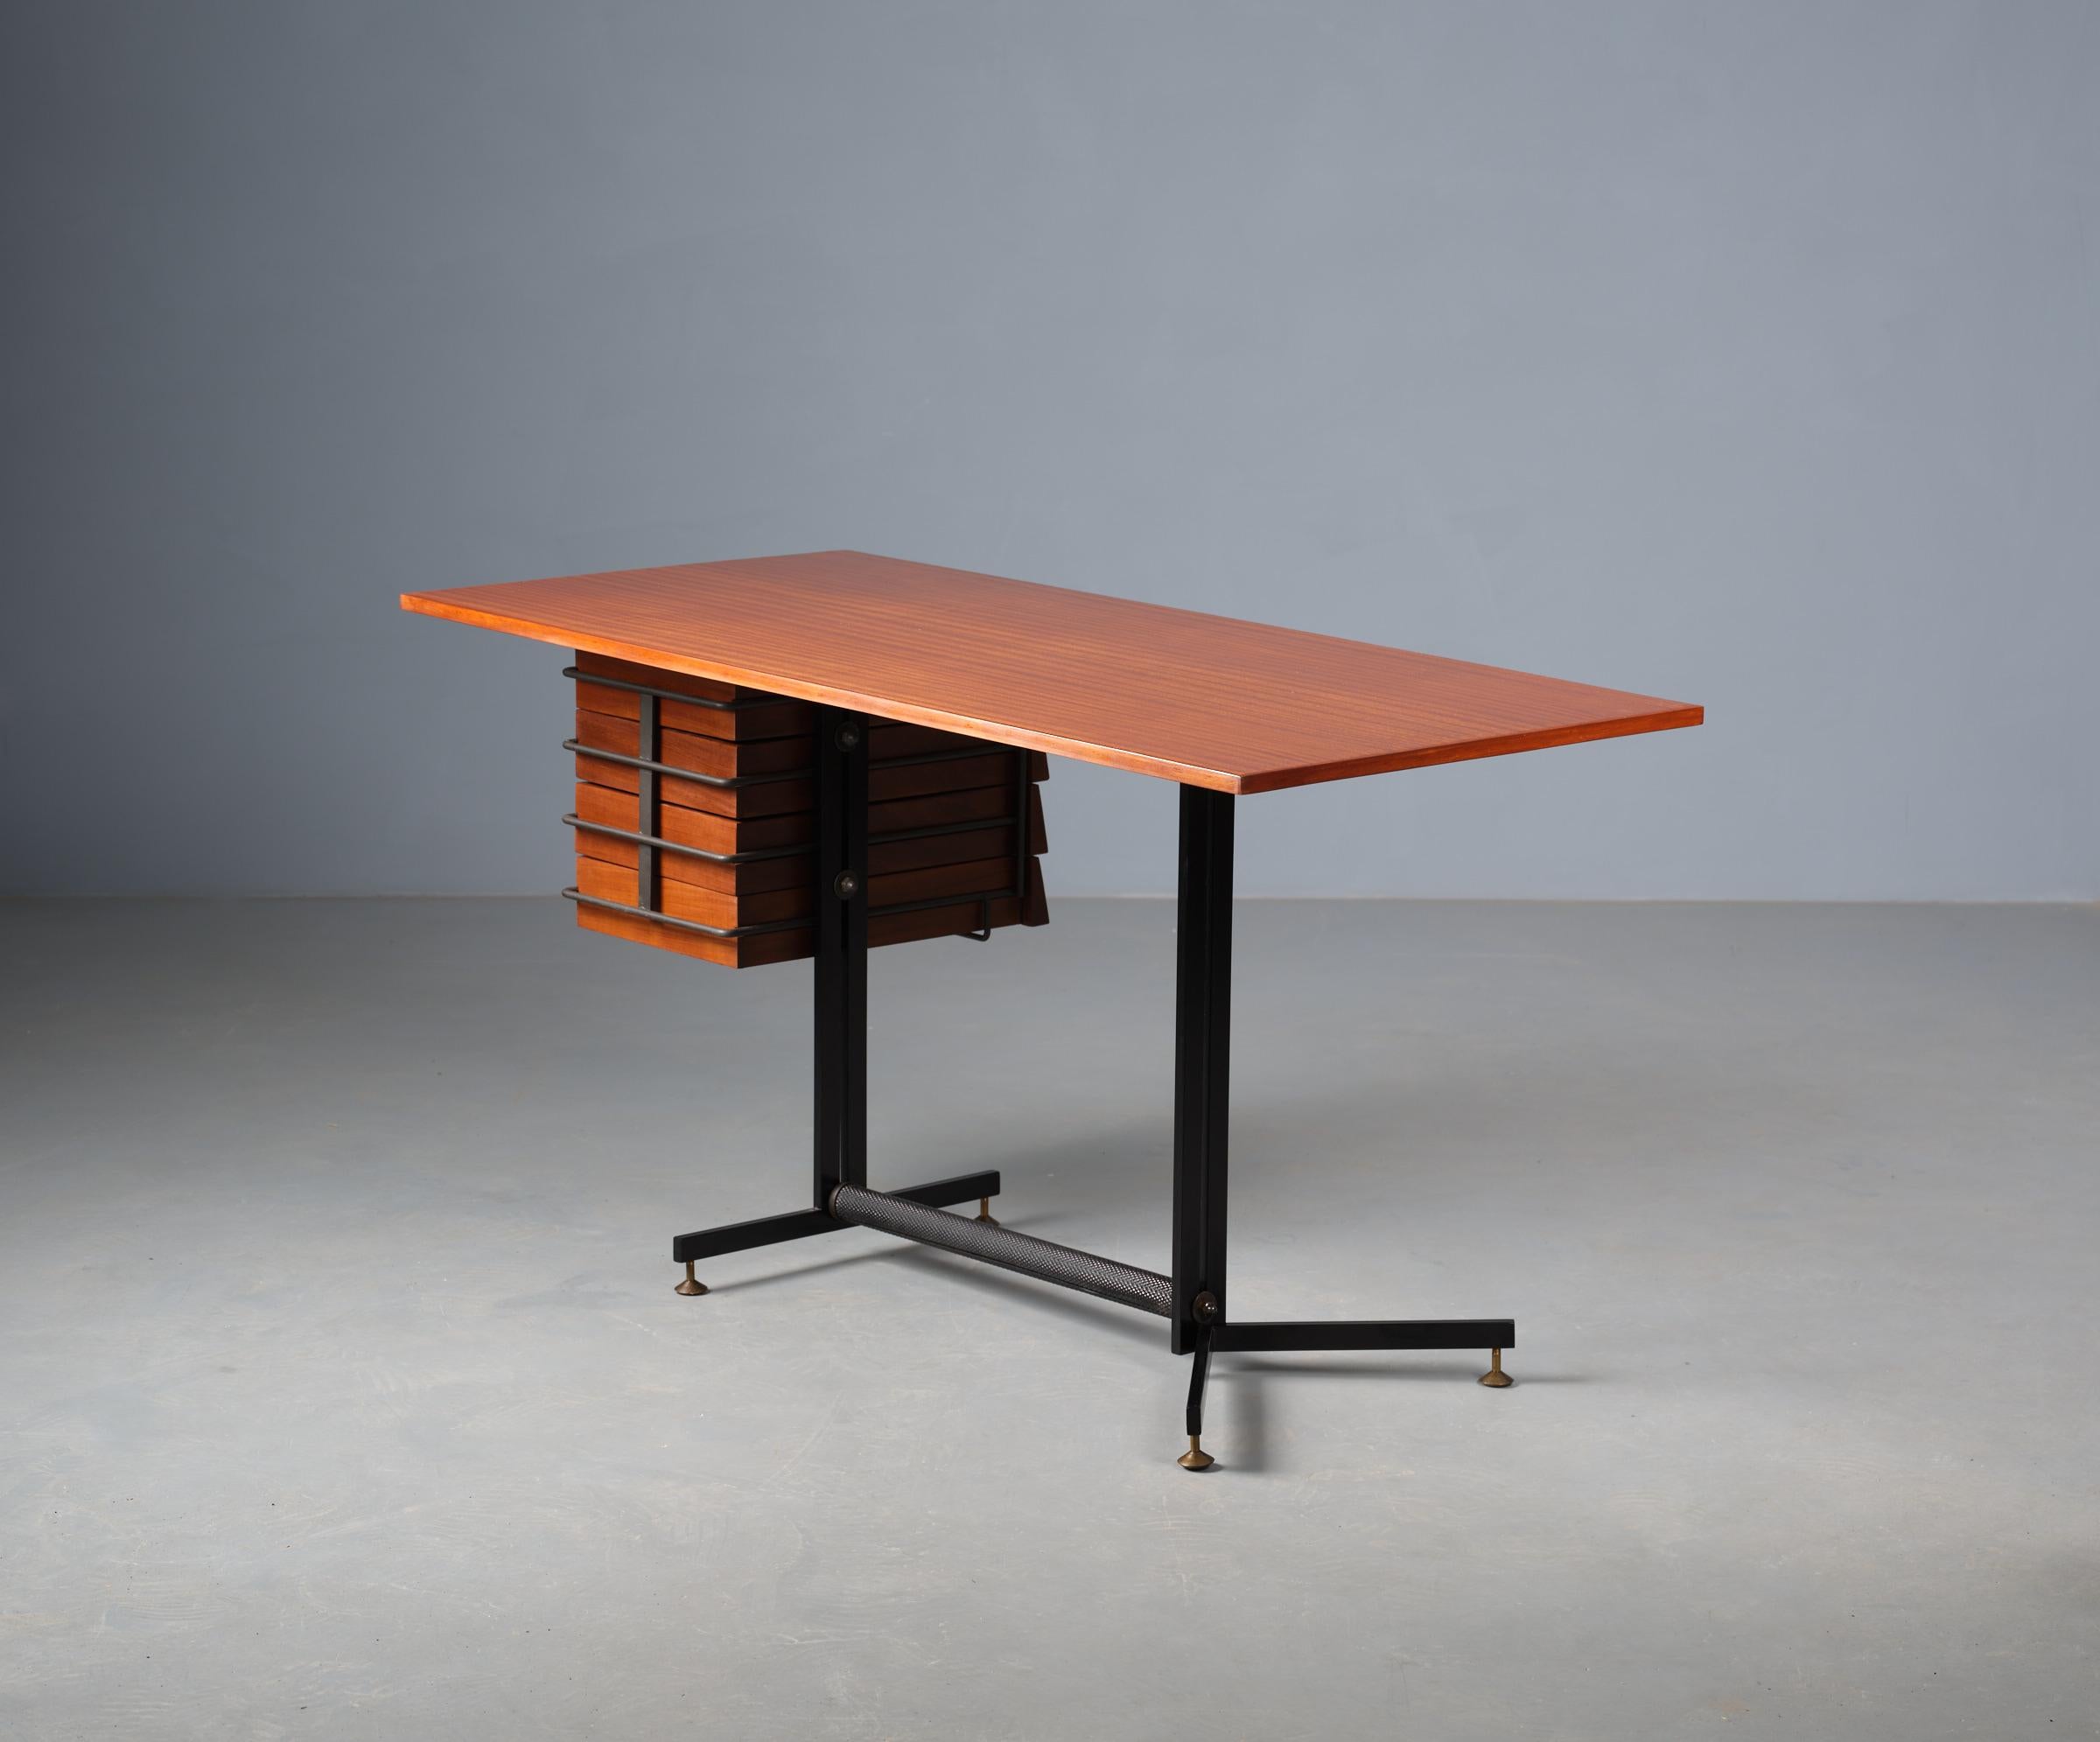 Restored vintage writing desk, originating from Italy in the 1950s, presents a striking example of midcentury design ethos. Crafted from rich teak wood and featuring a sleek frame of lacquered black iron with brass accents, this piece epitomizes the